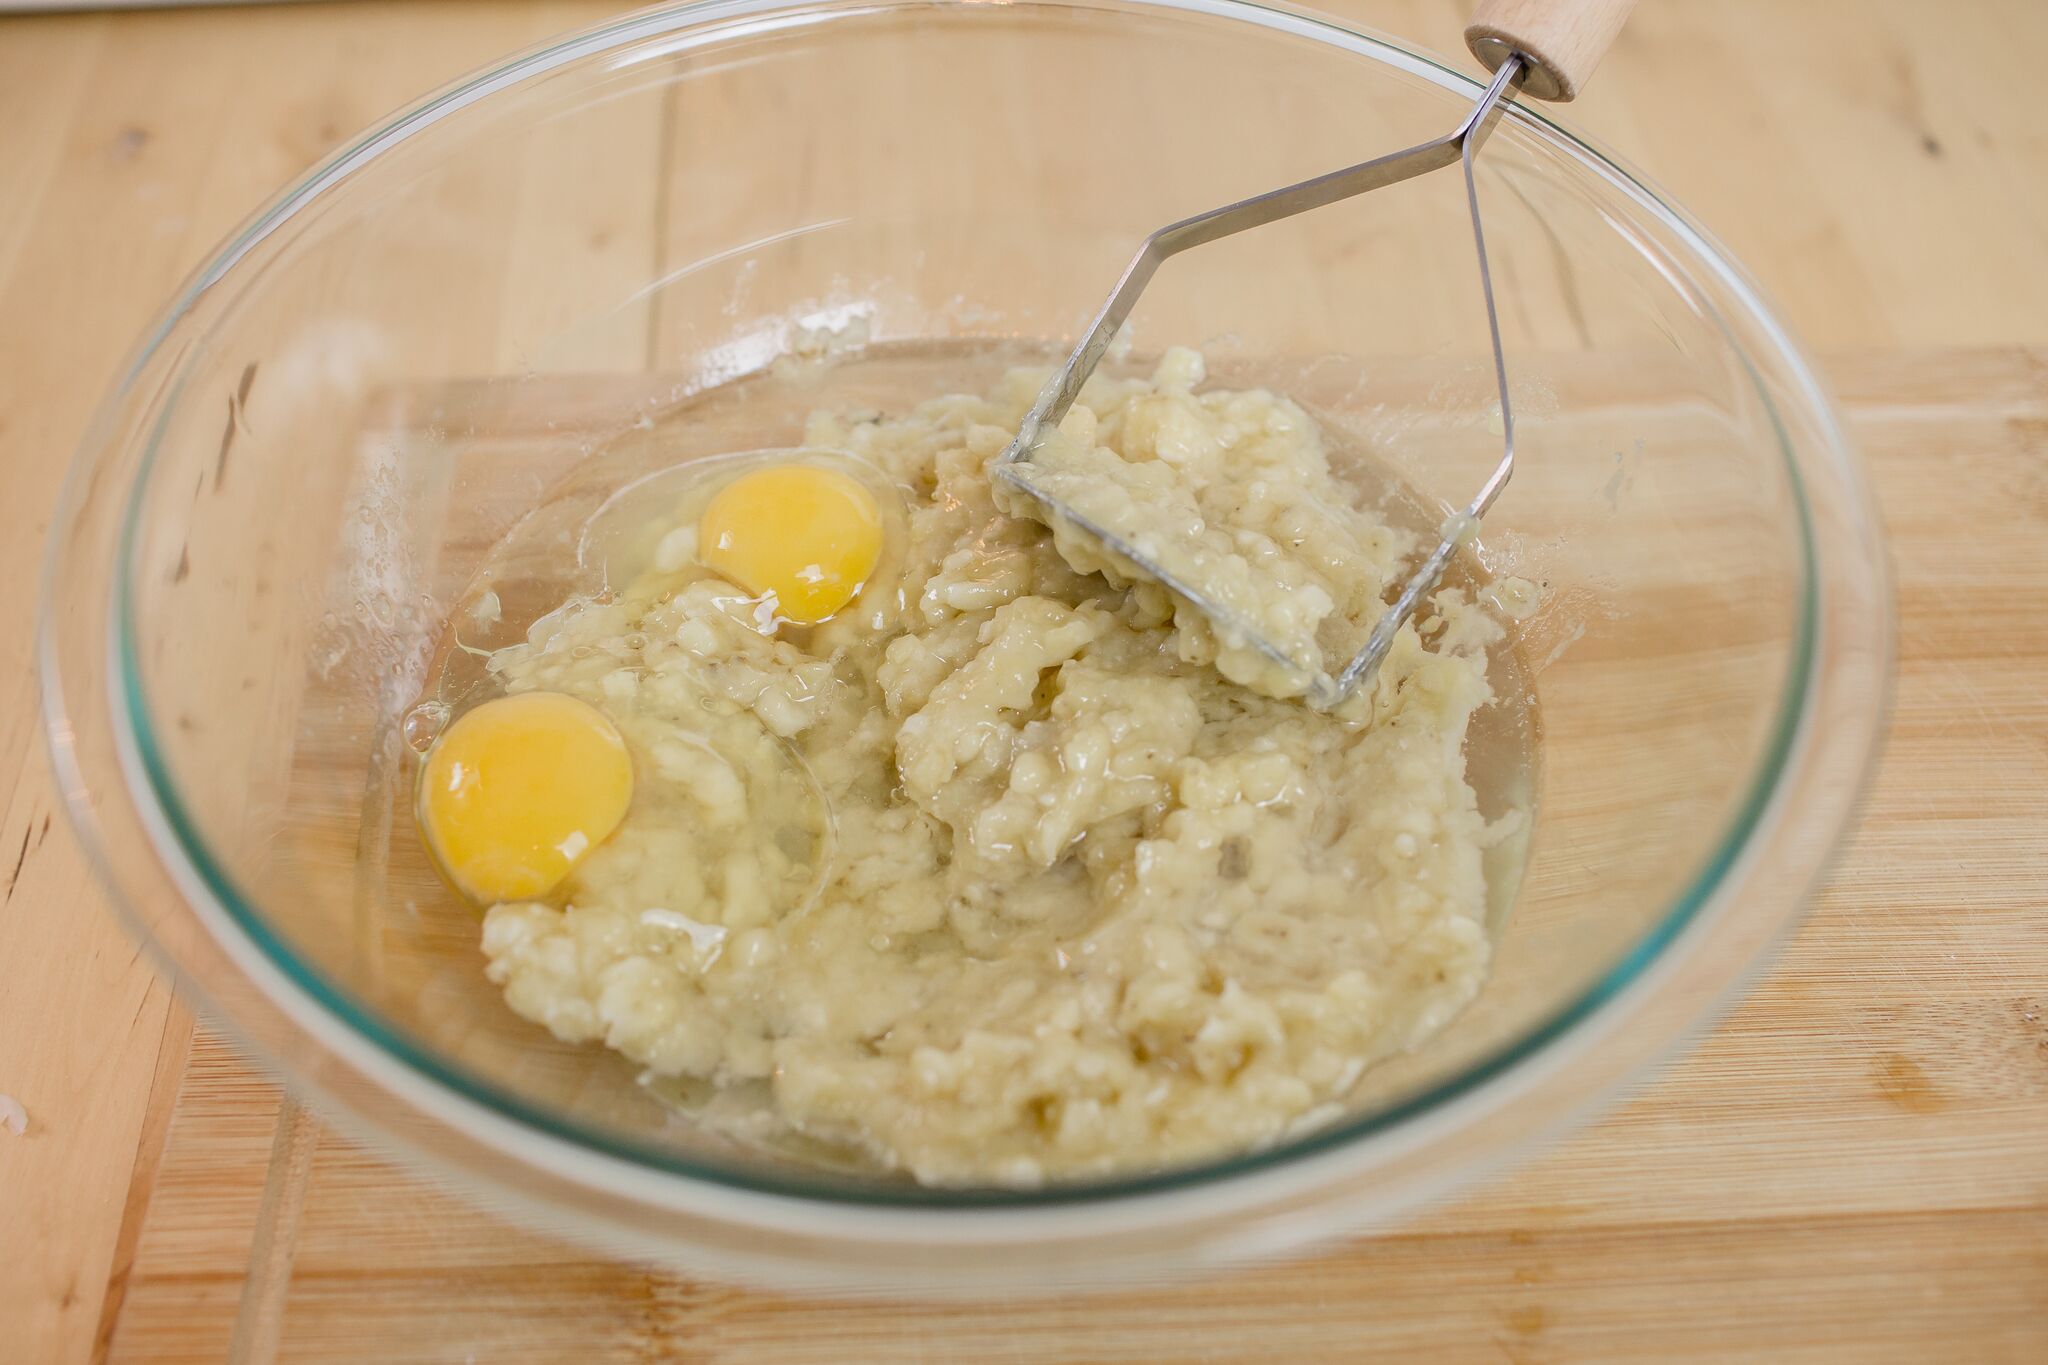 In a large bowl mix together the mashed bananas, coconut oil and eggs.